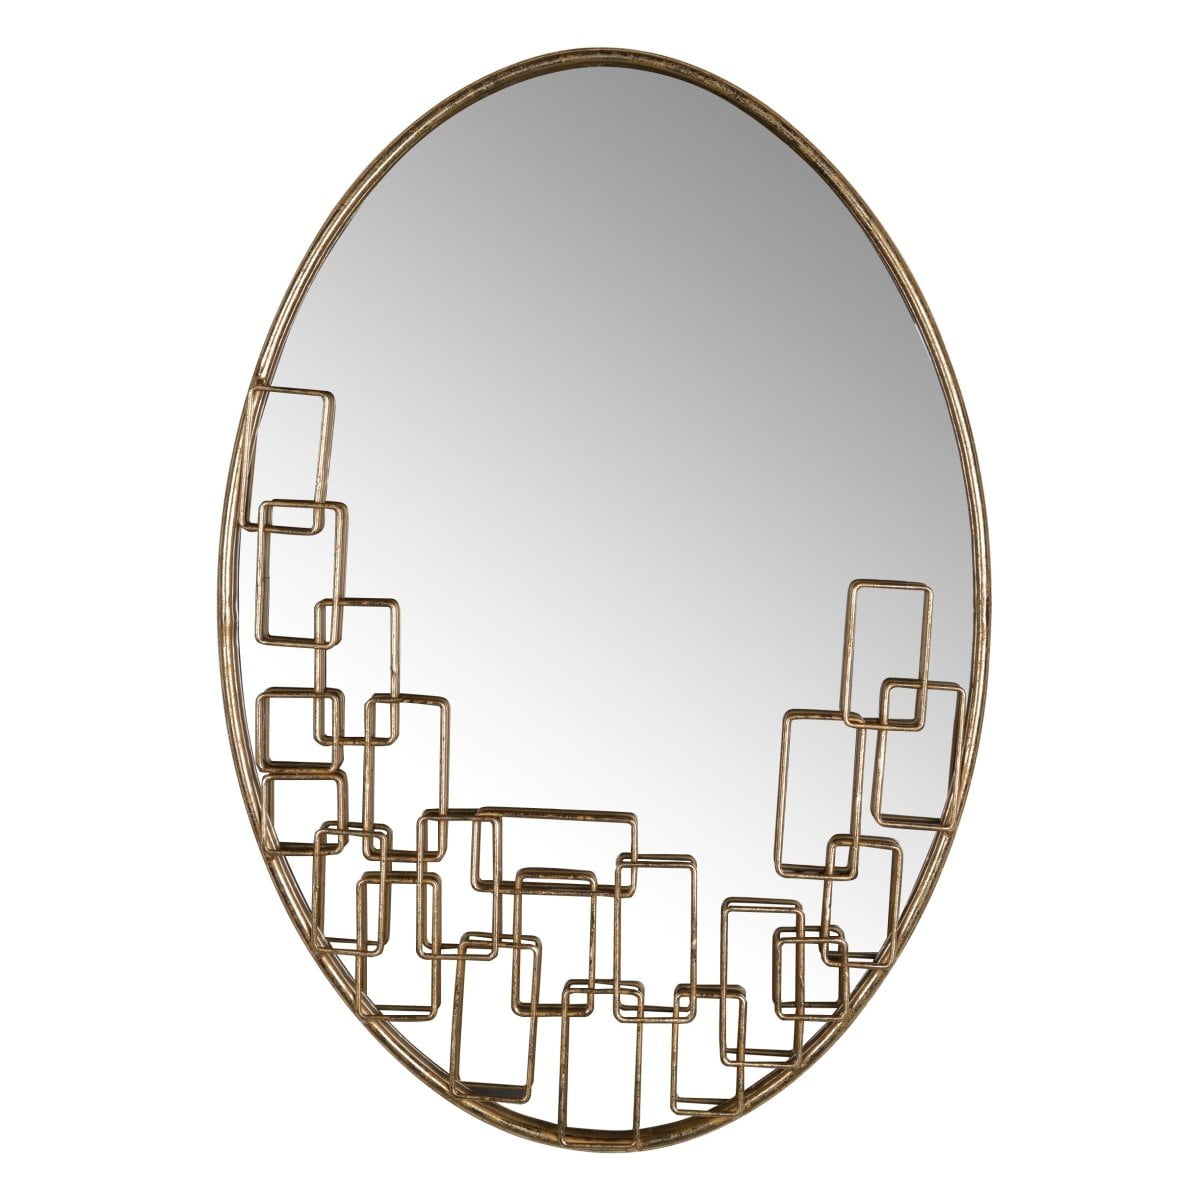 AB-41948 MAXIME OVAL MIRROR picket and rail